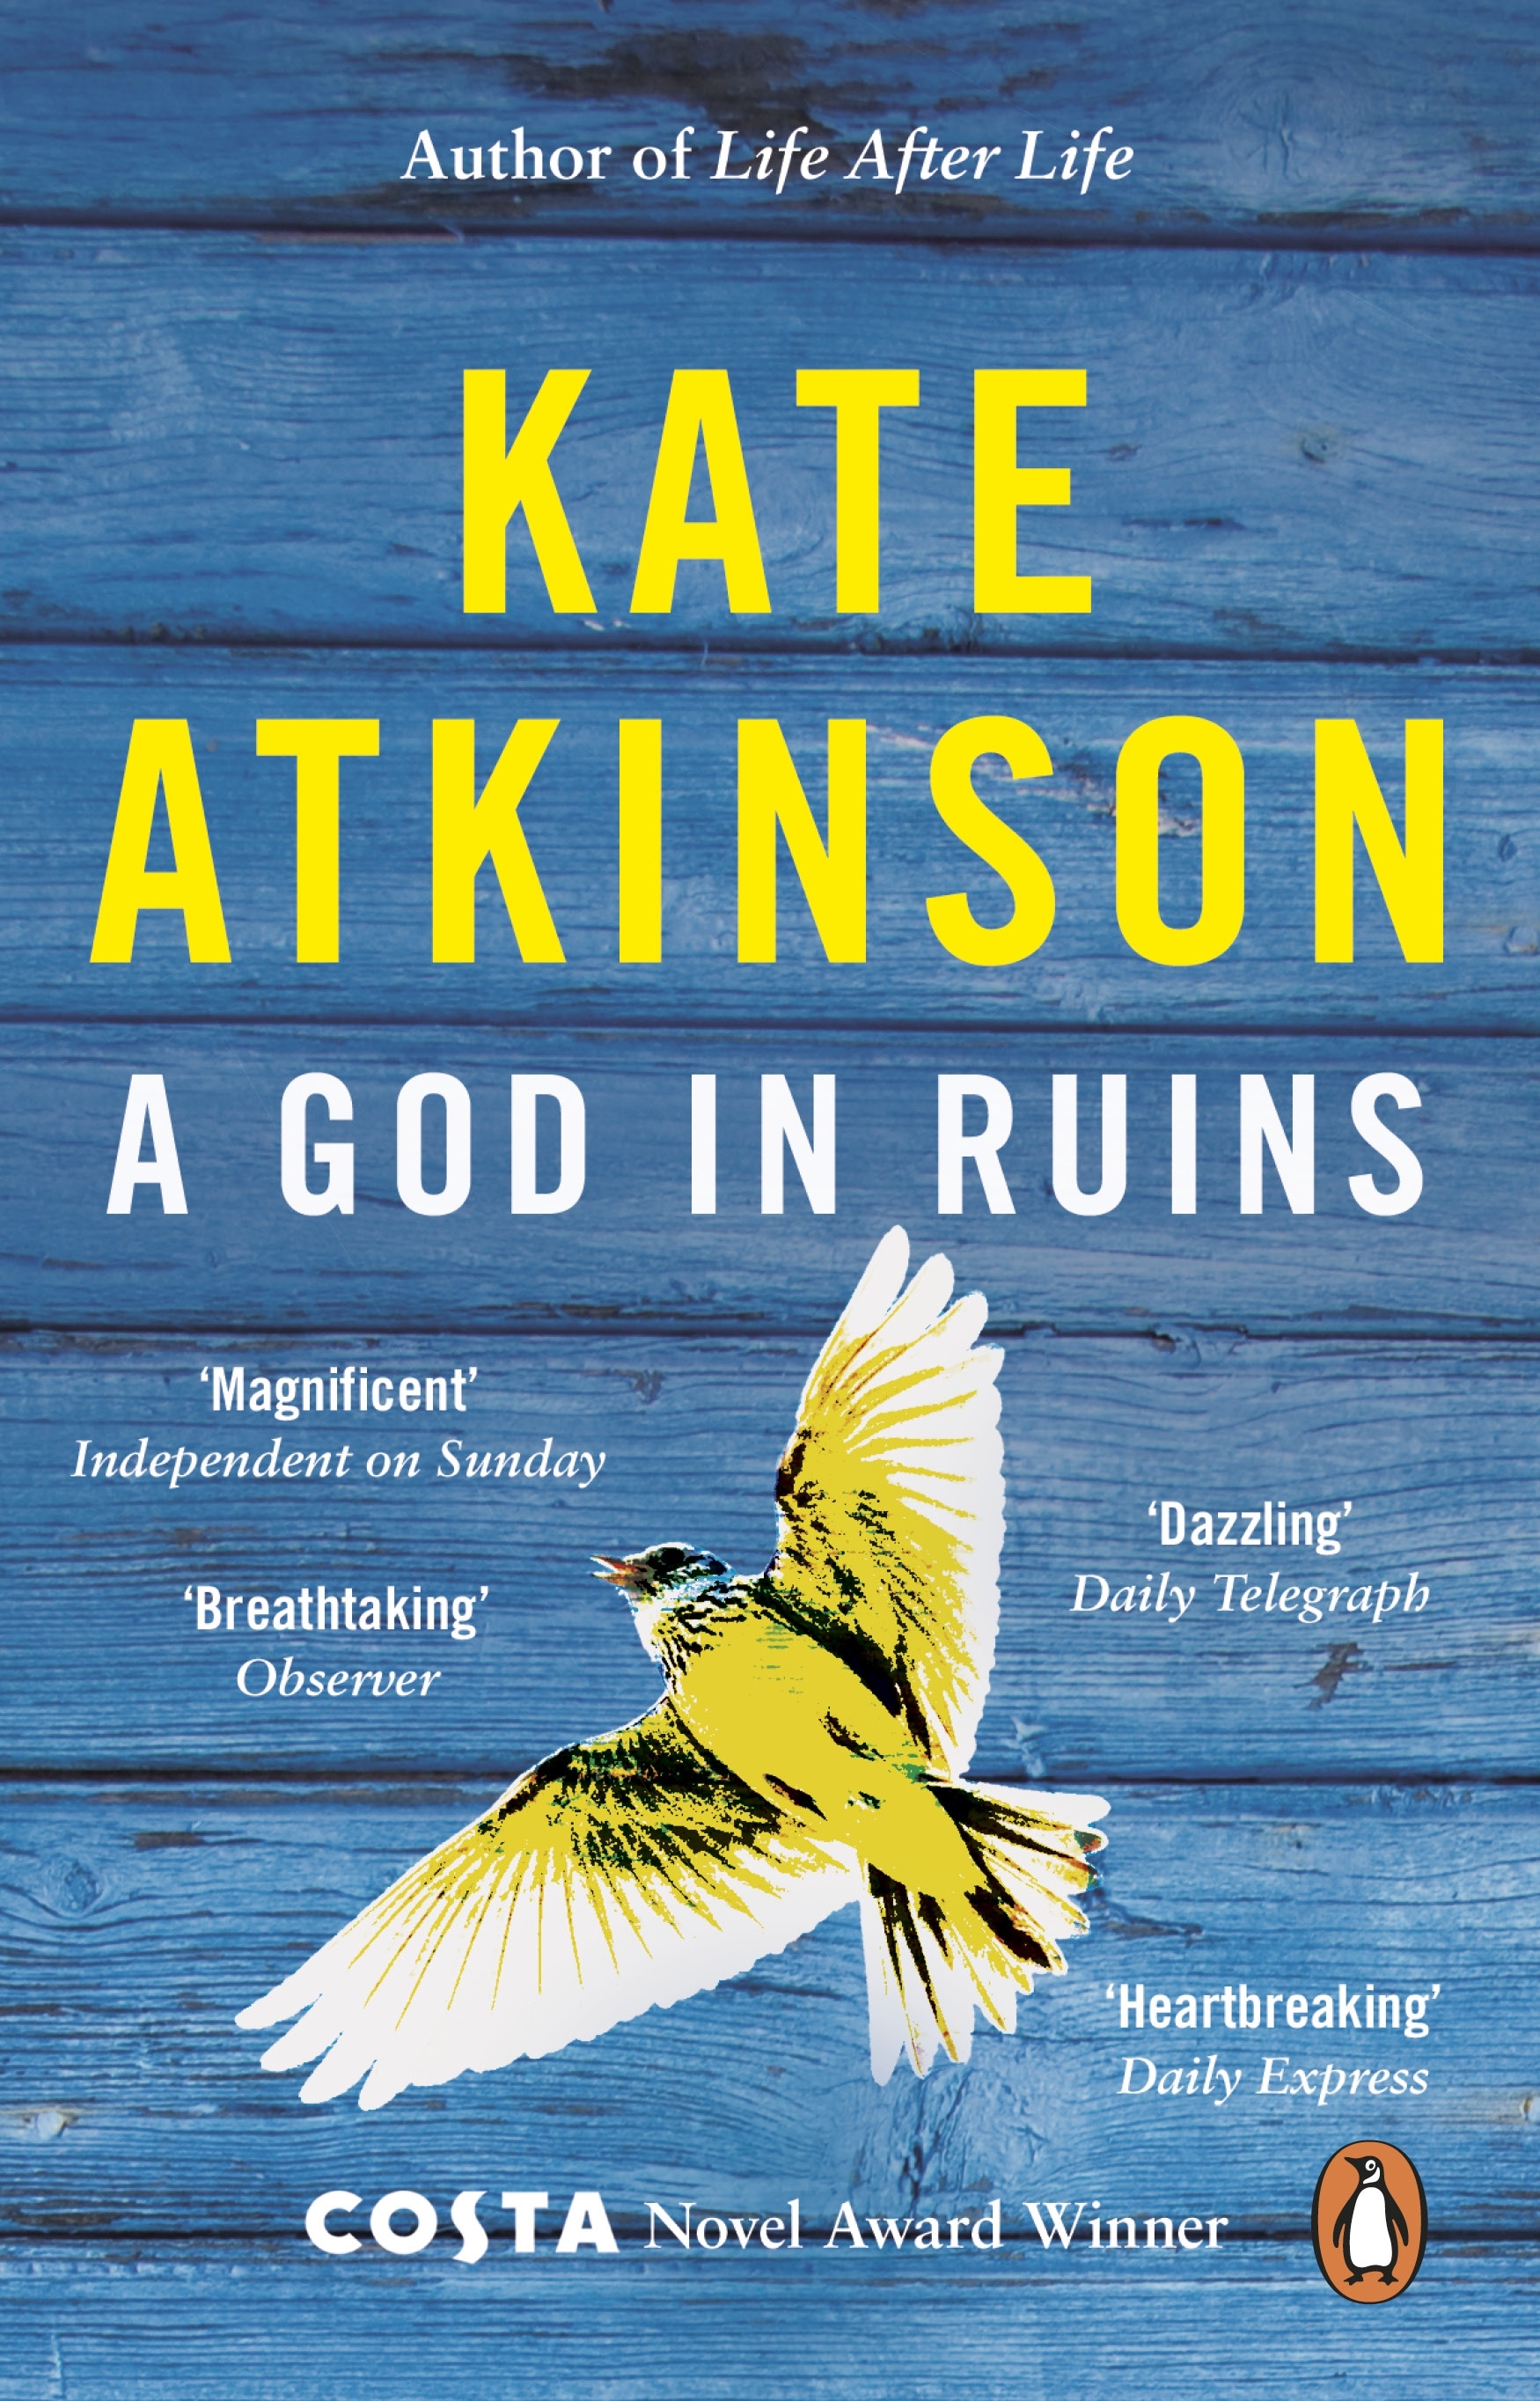 Book “A God in Ruins” by Kate Atkinson — December 31, 2015